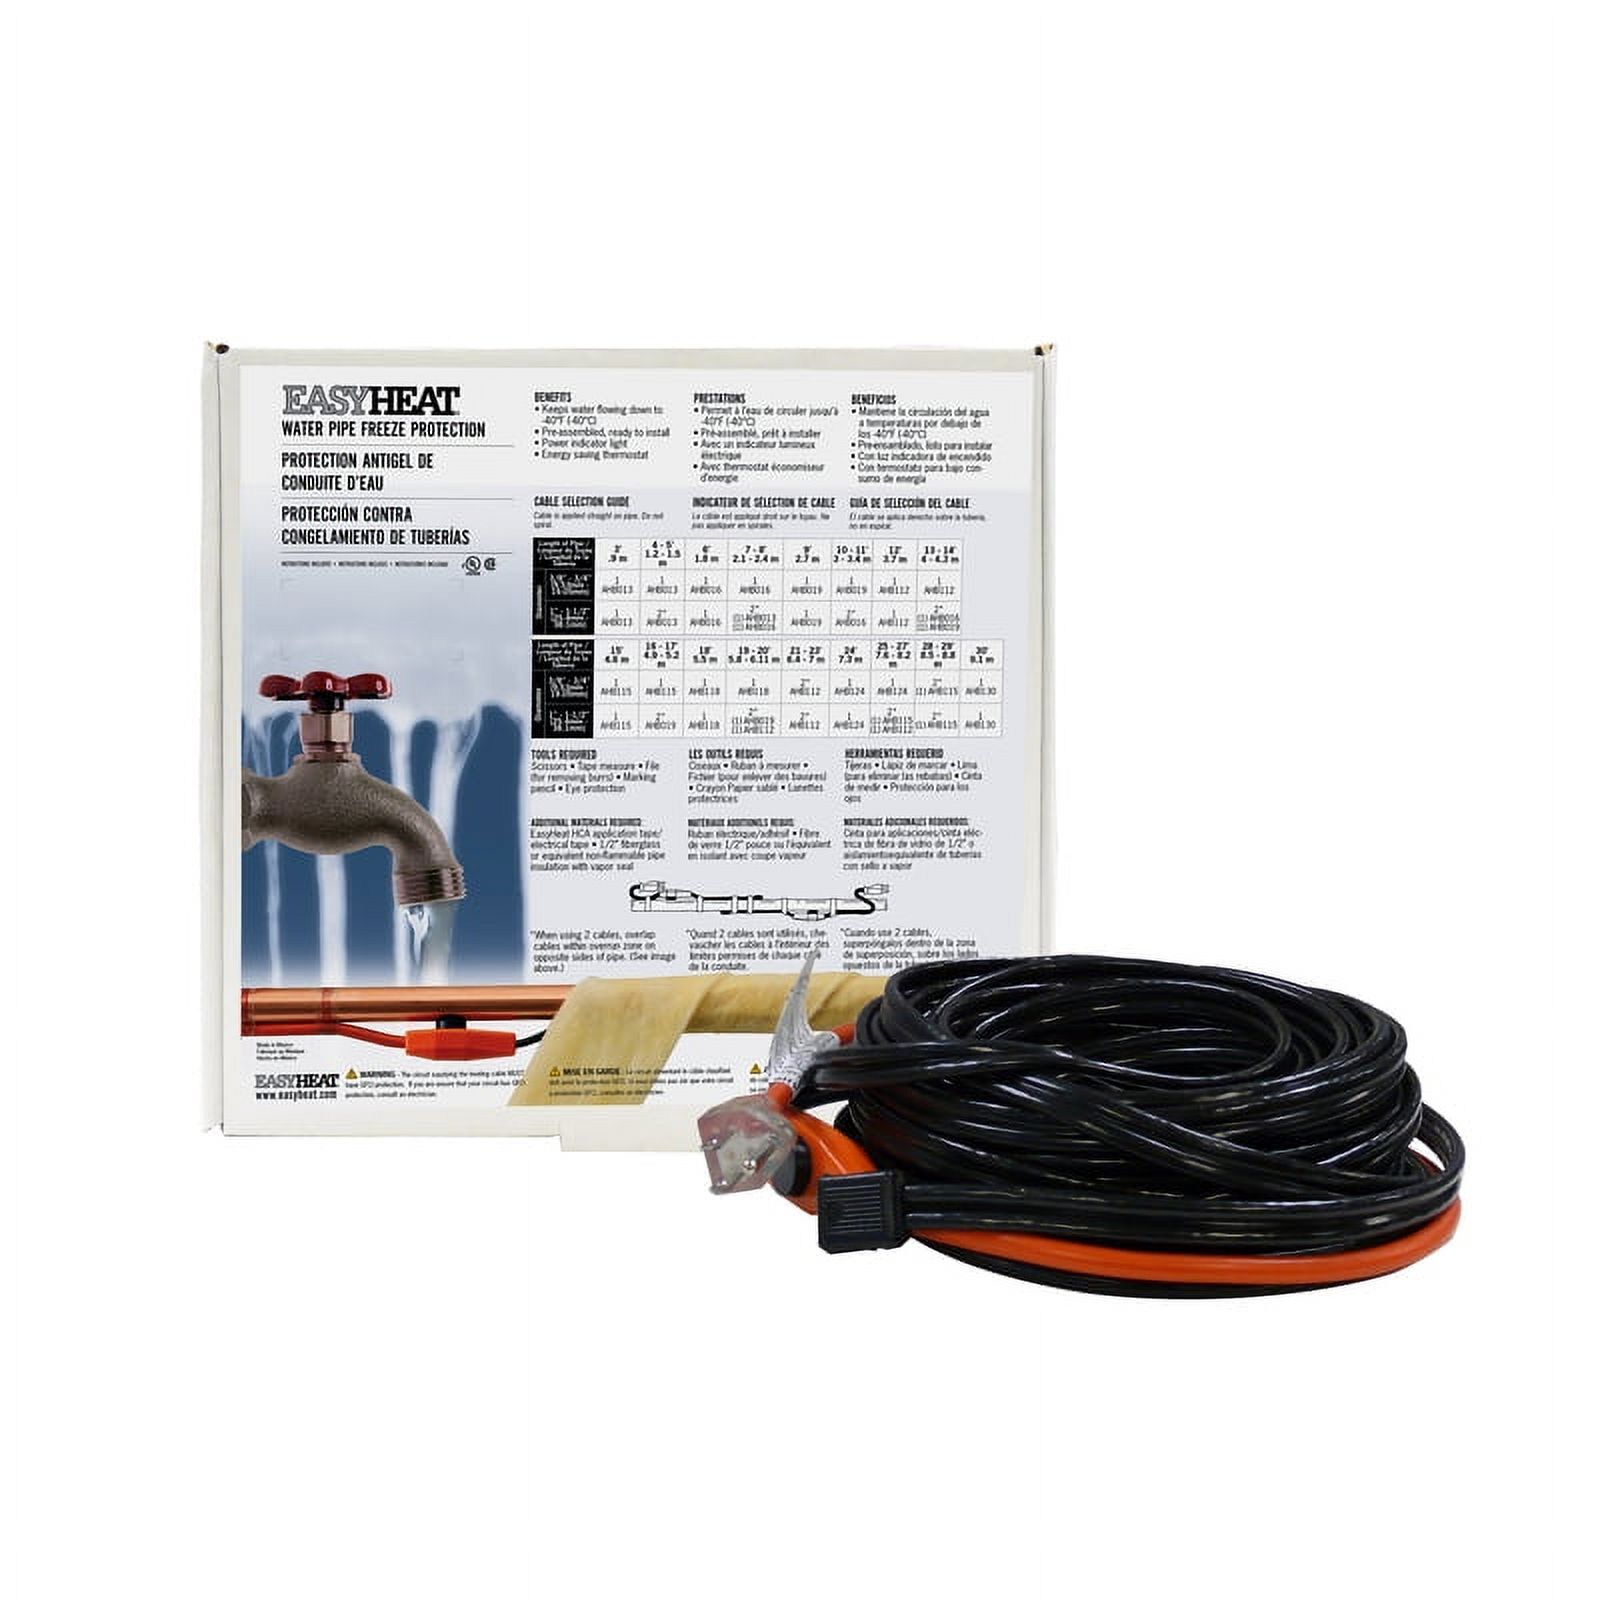 Easy Heat AHB016 Heating Cable For Water Pipe - image 4 of 6